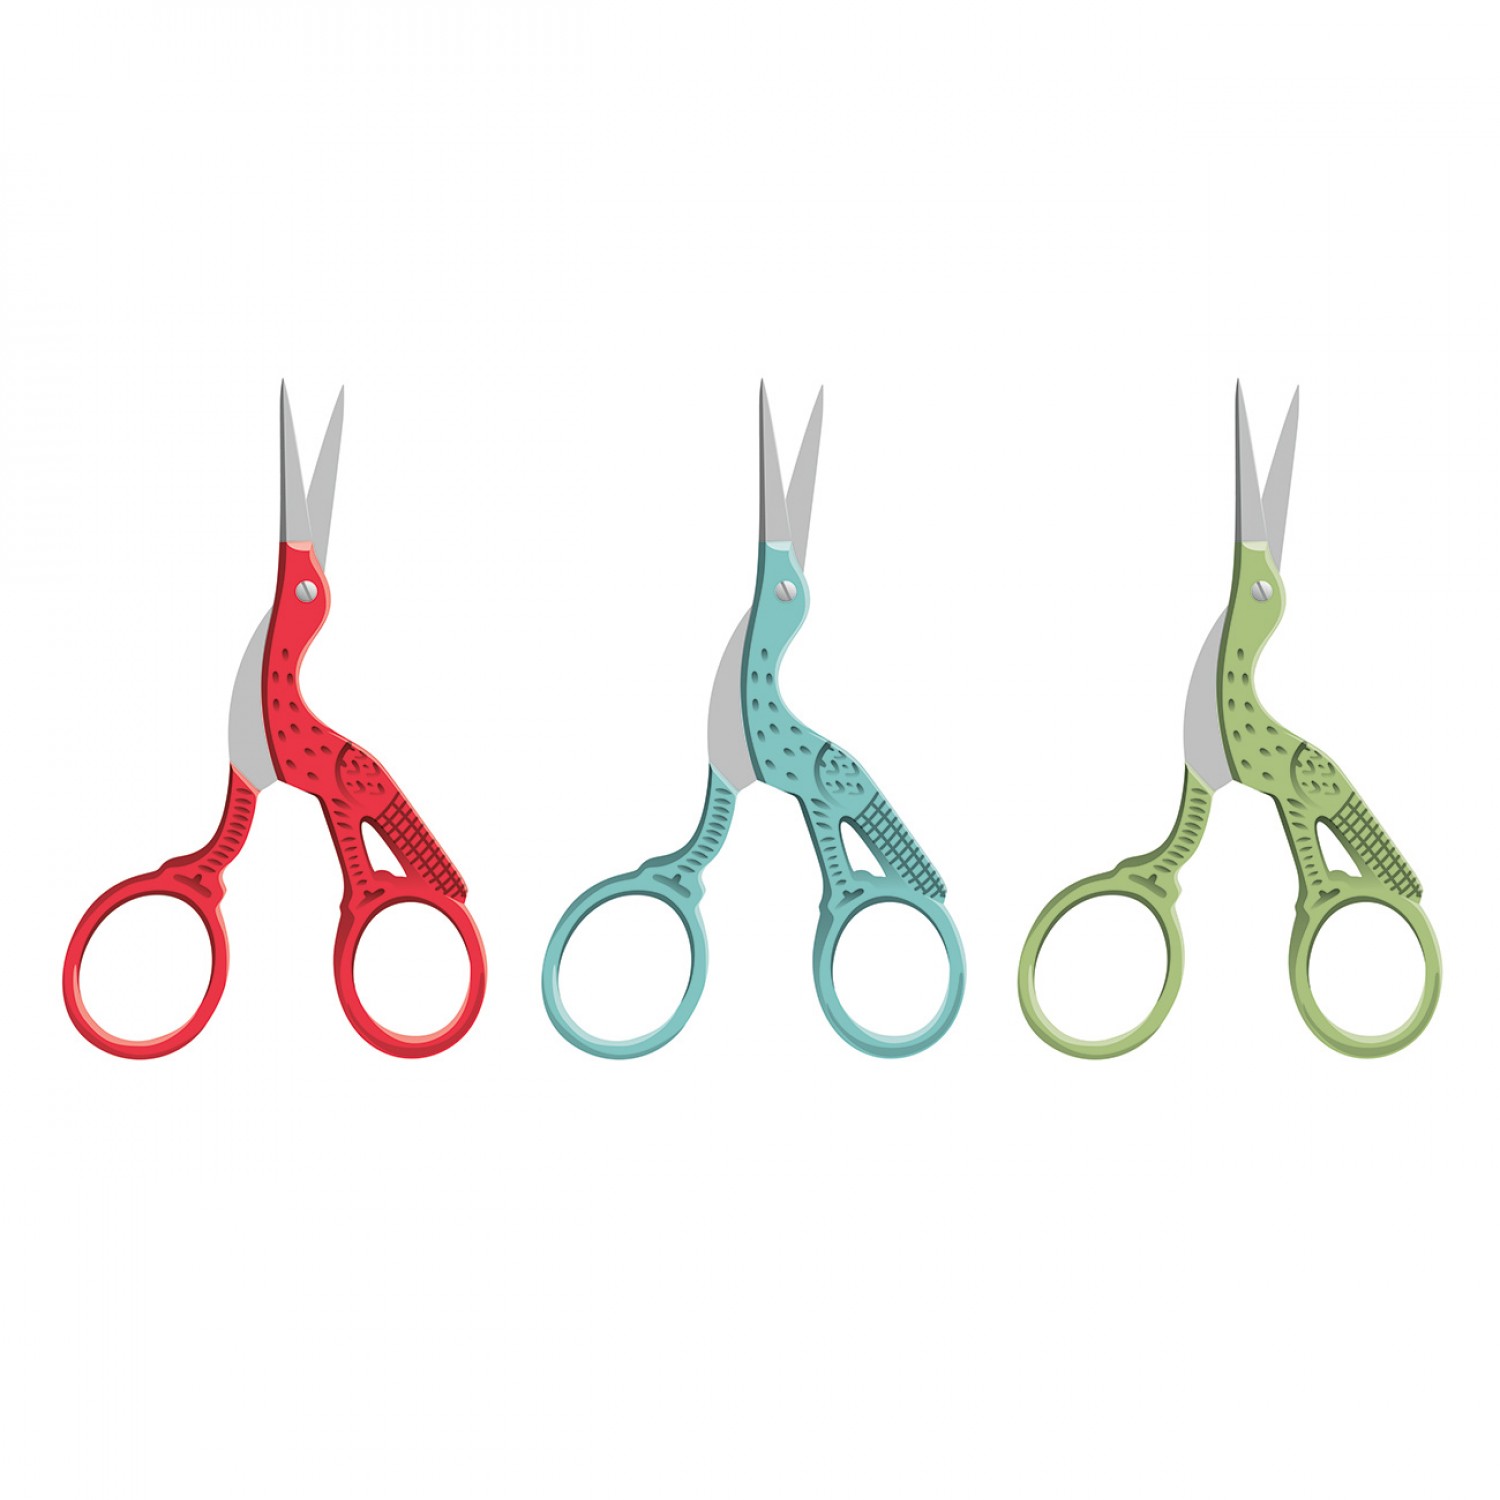 Embroidery Scissors - Tropical Storks - Green